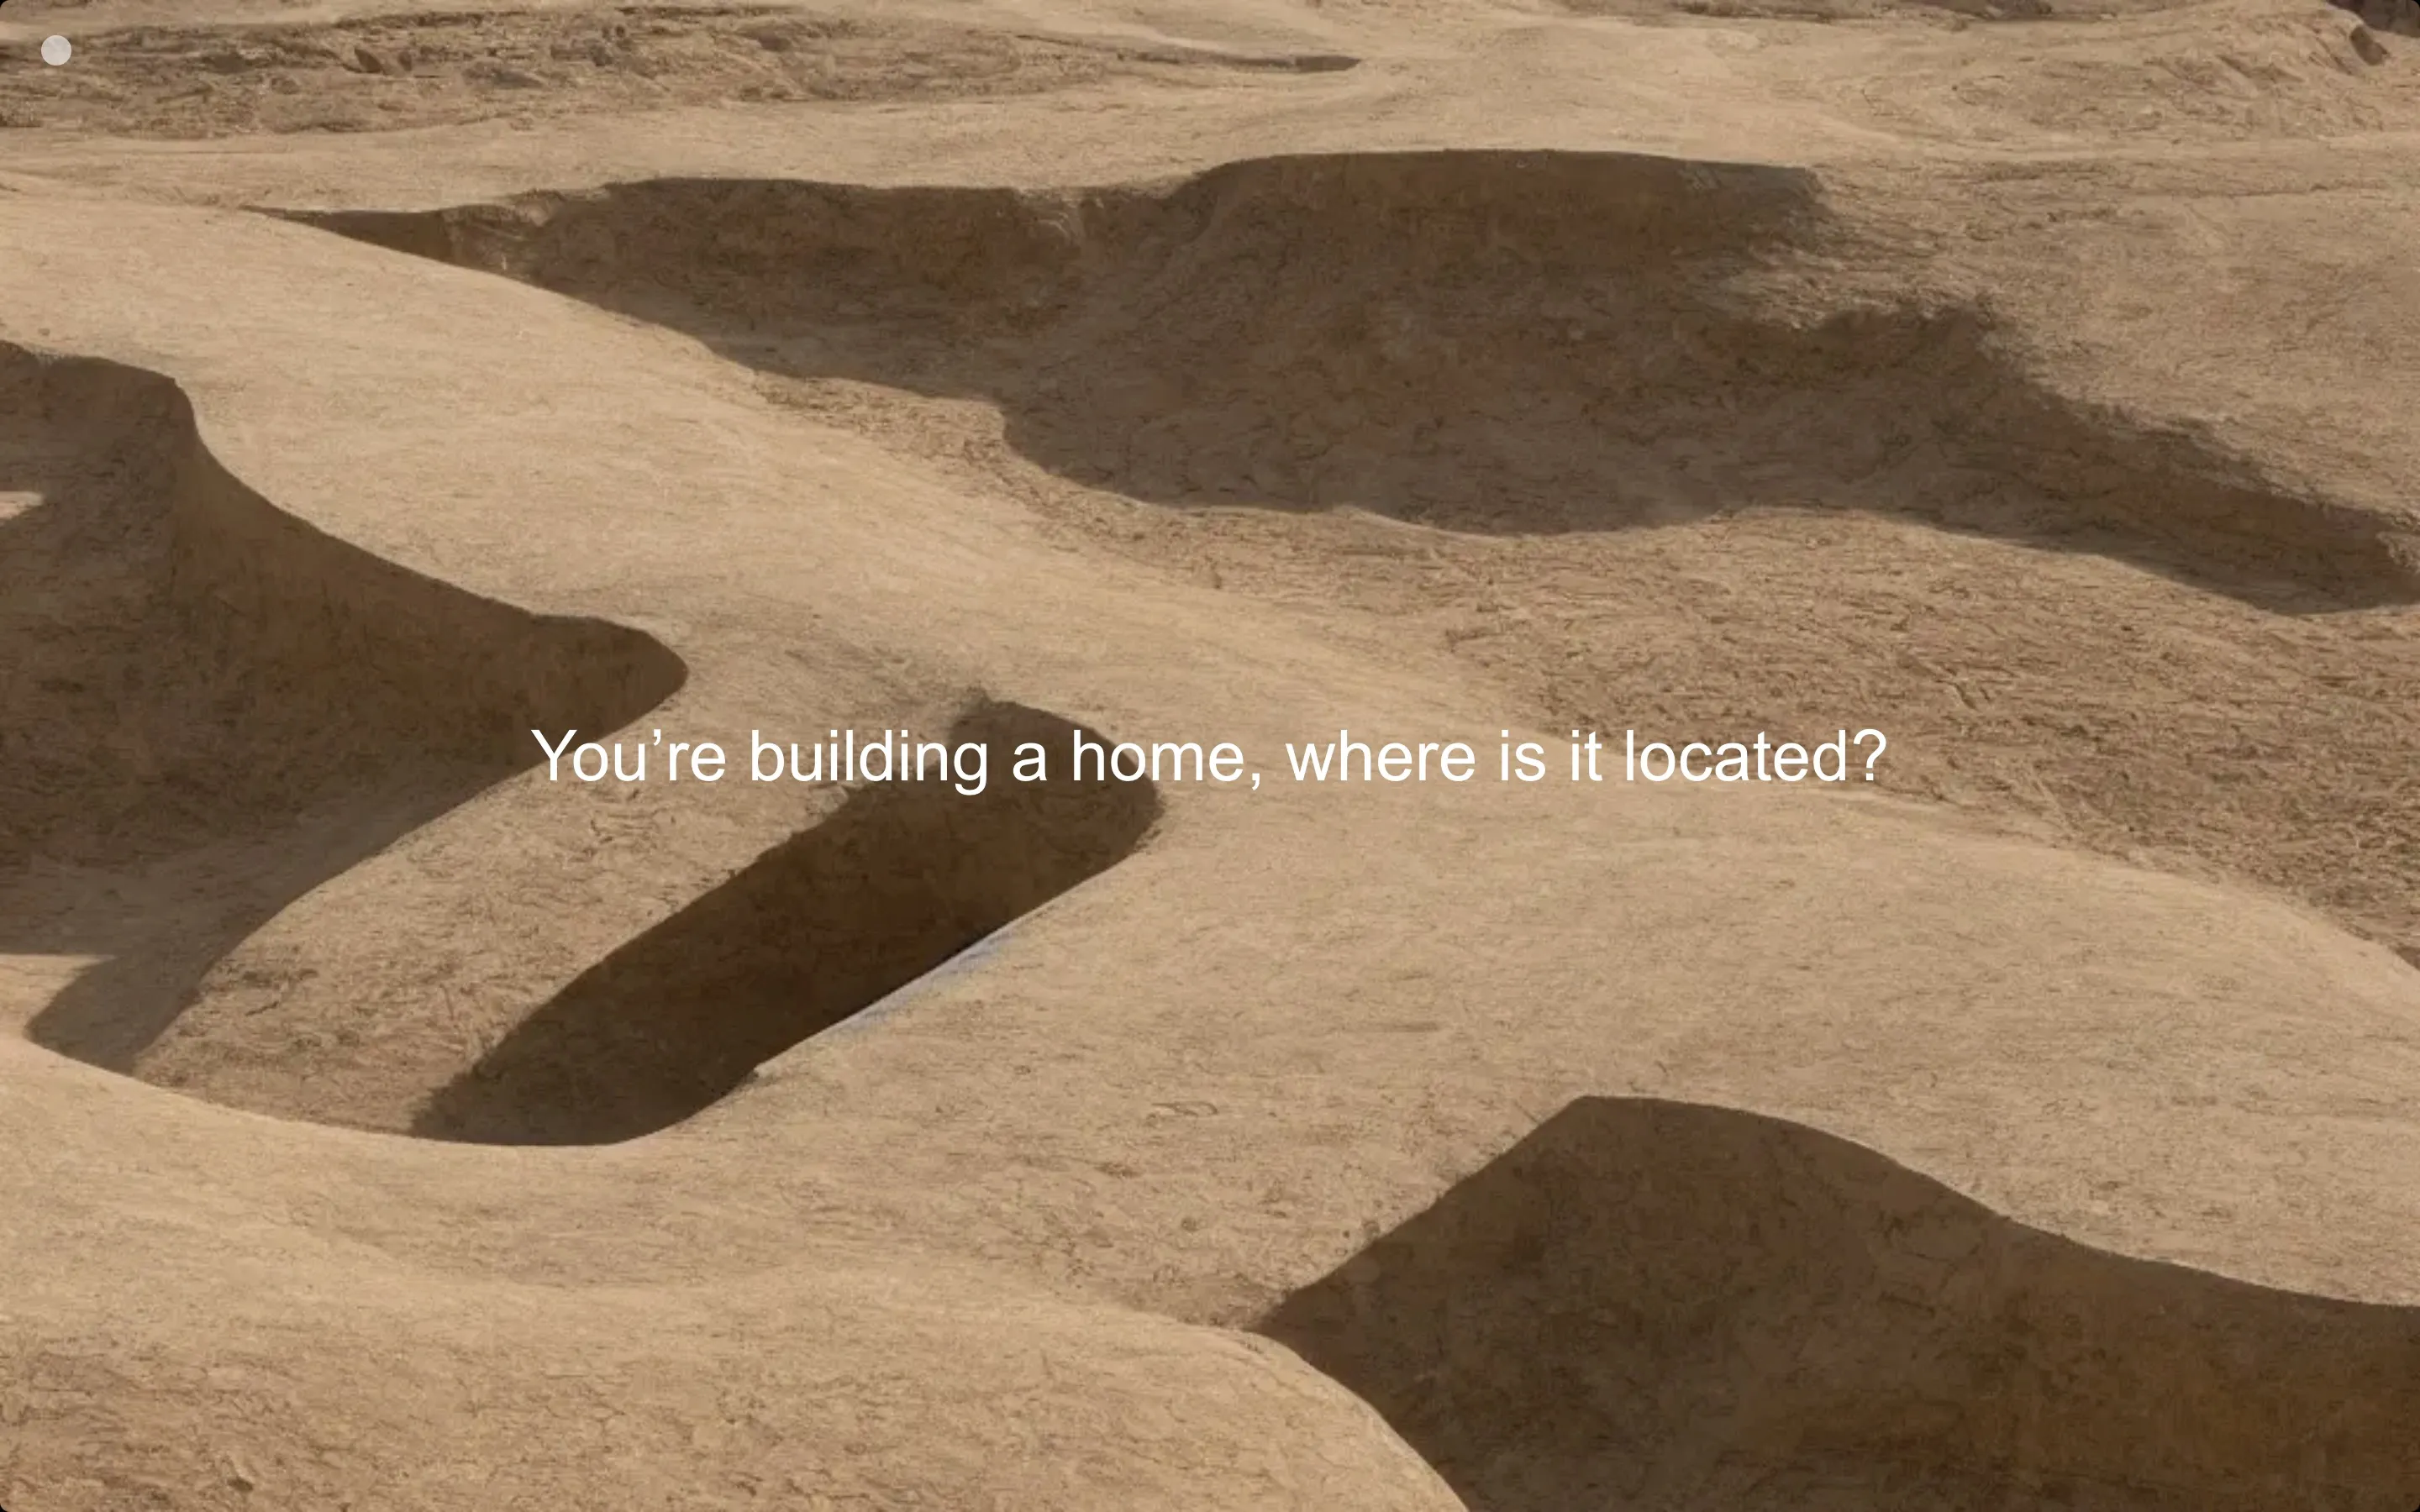 website with a background and text that says 'You're building a home, where is it located?'